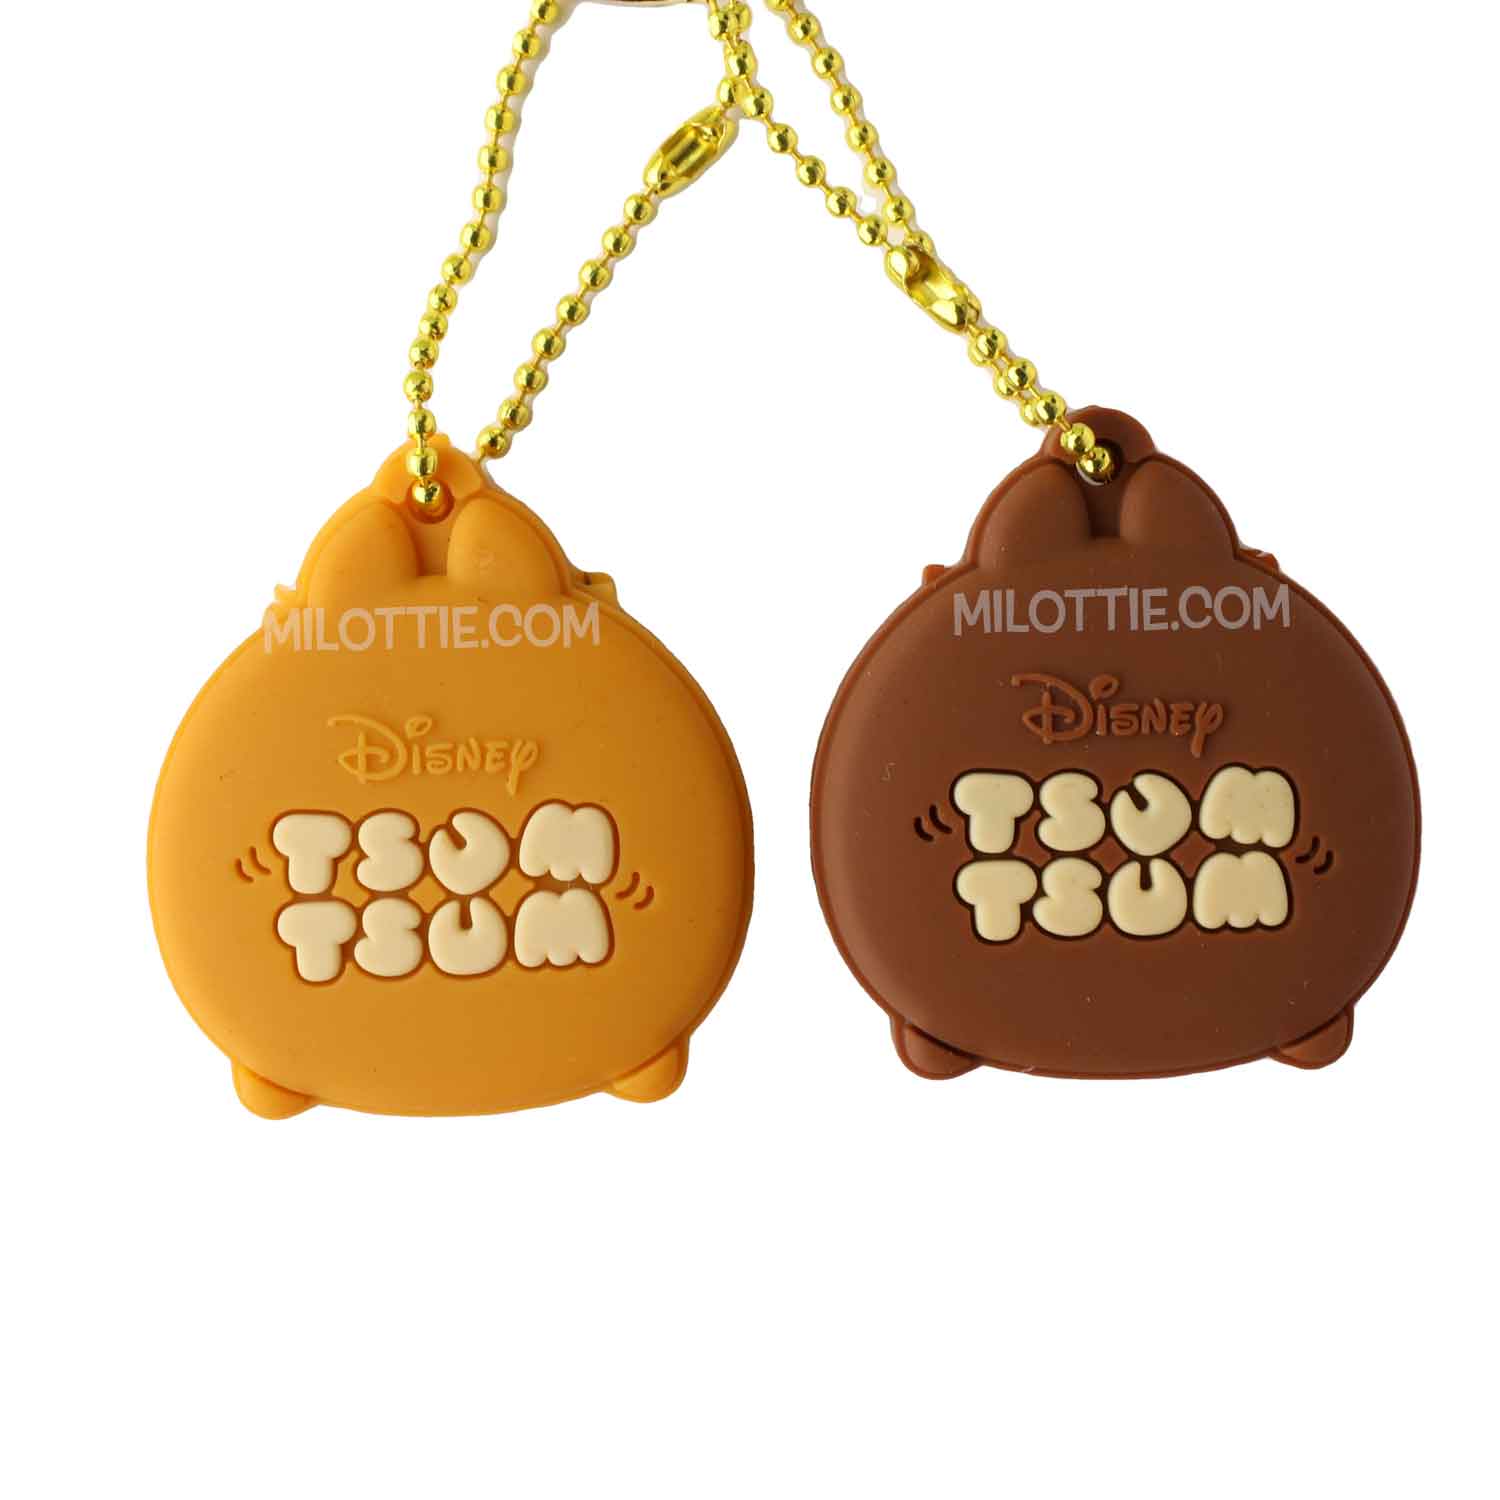 chip and dale key covers - Milottie